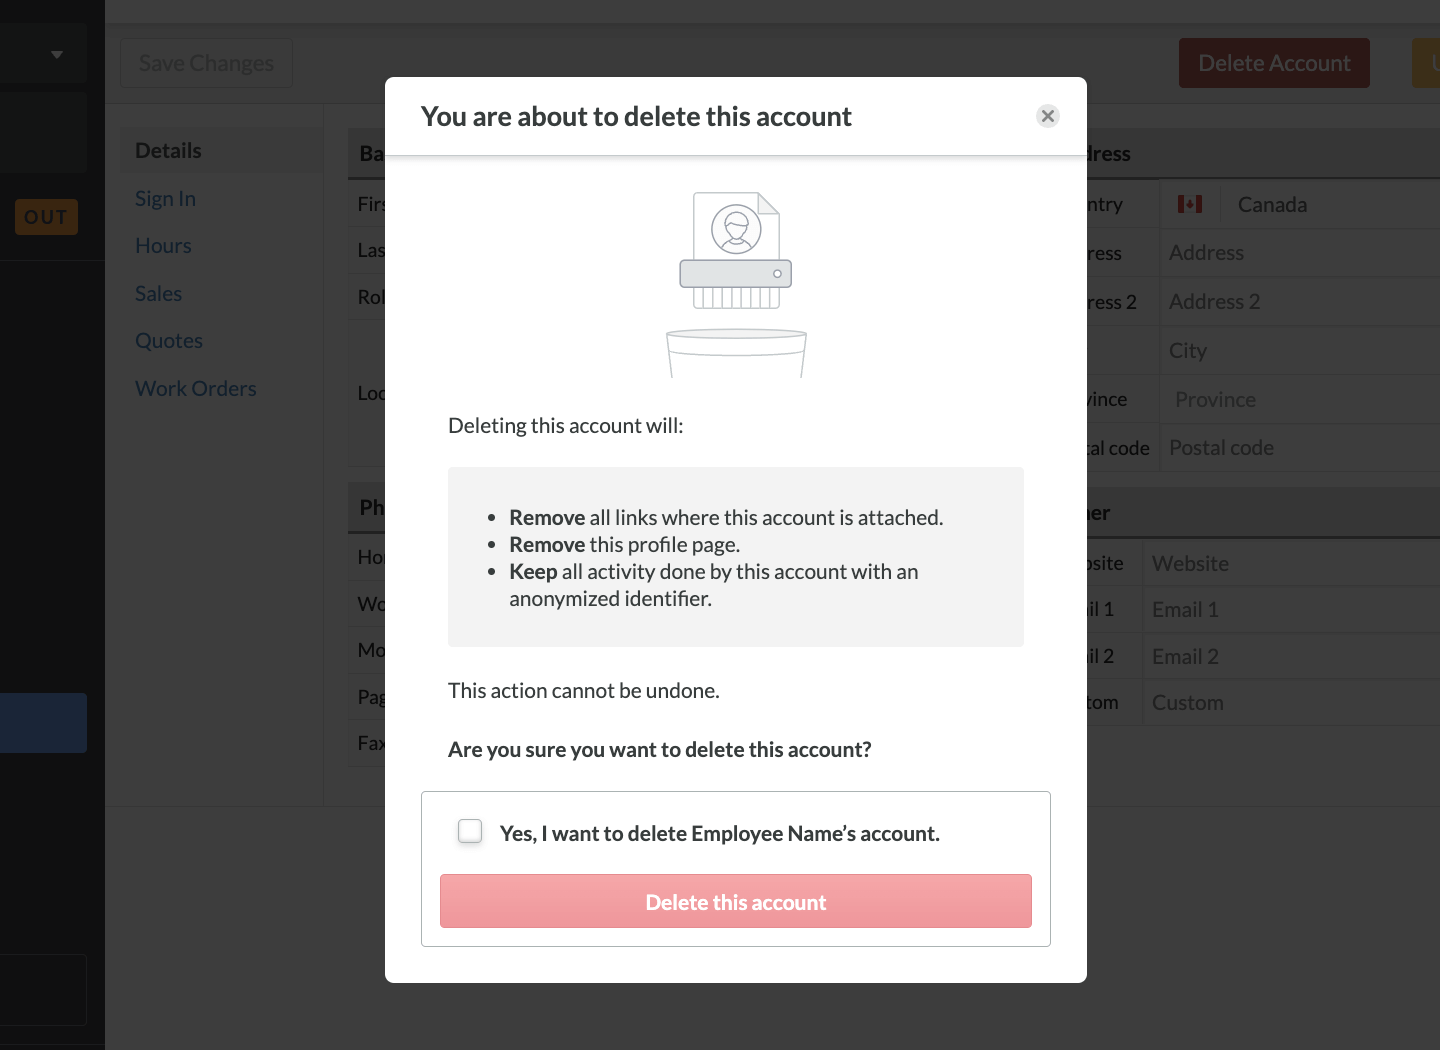 Pop-up warning about consequences of account deletion.